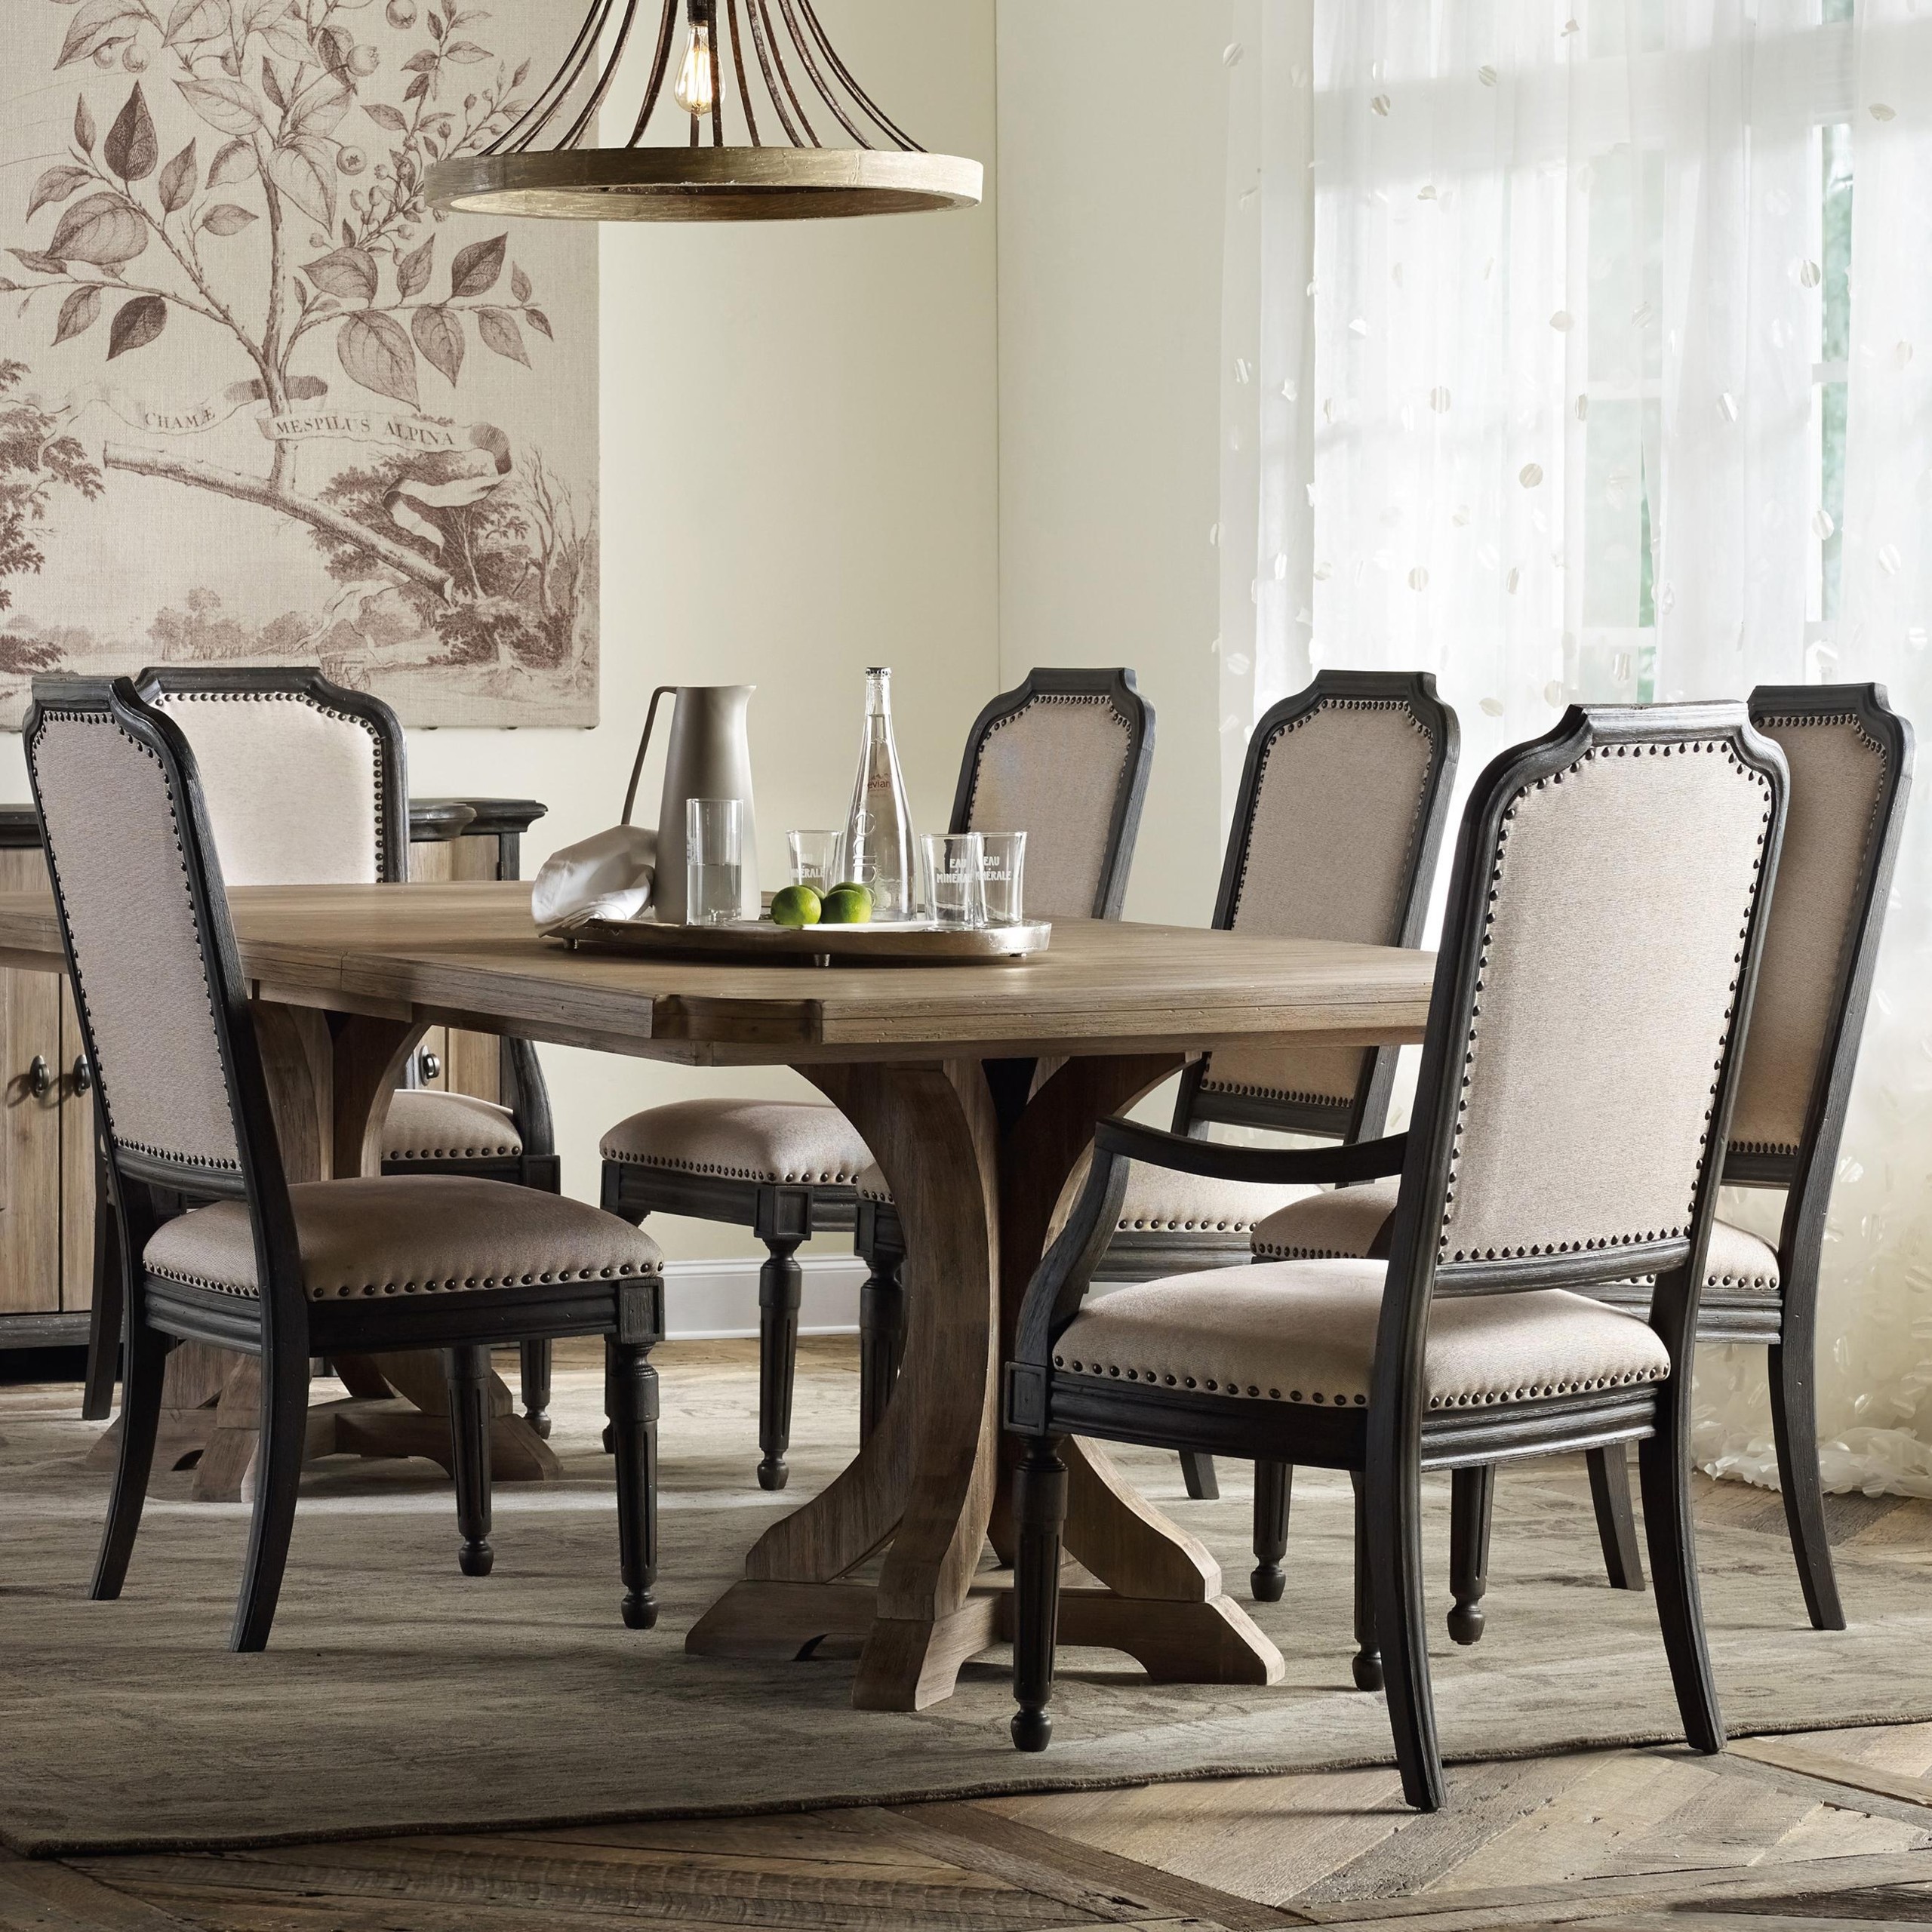 My new dining room set corsica rectangle pedestal dining table